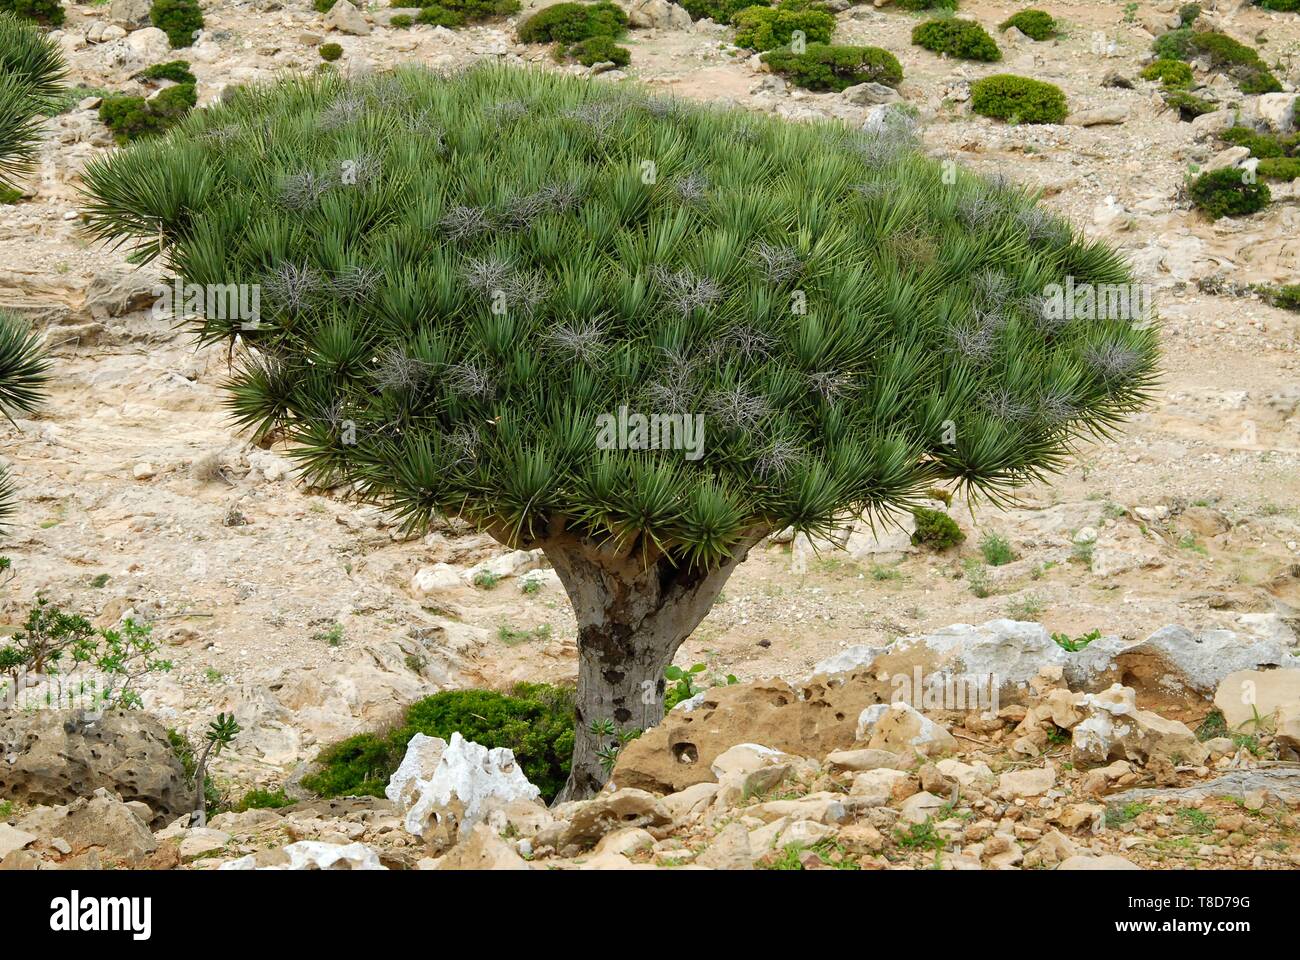 Yemen, Socotra Governorate, Socotra Island, listed as World Heritage by UNESCO, Homhil Natural Reserve, Socotra dragon tree (Dracaena cinnabari), endemic species Stock Photo